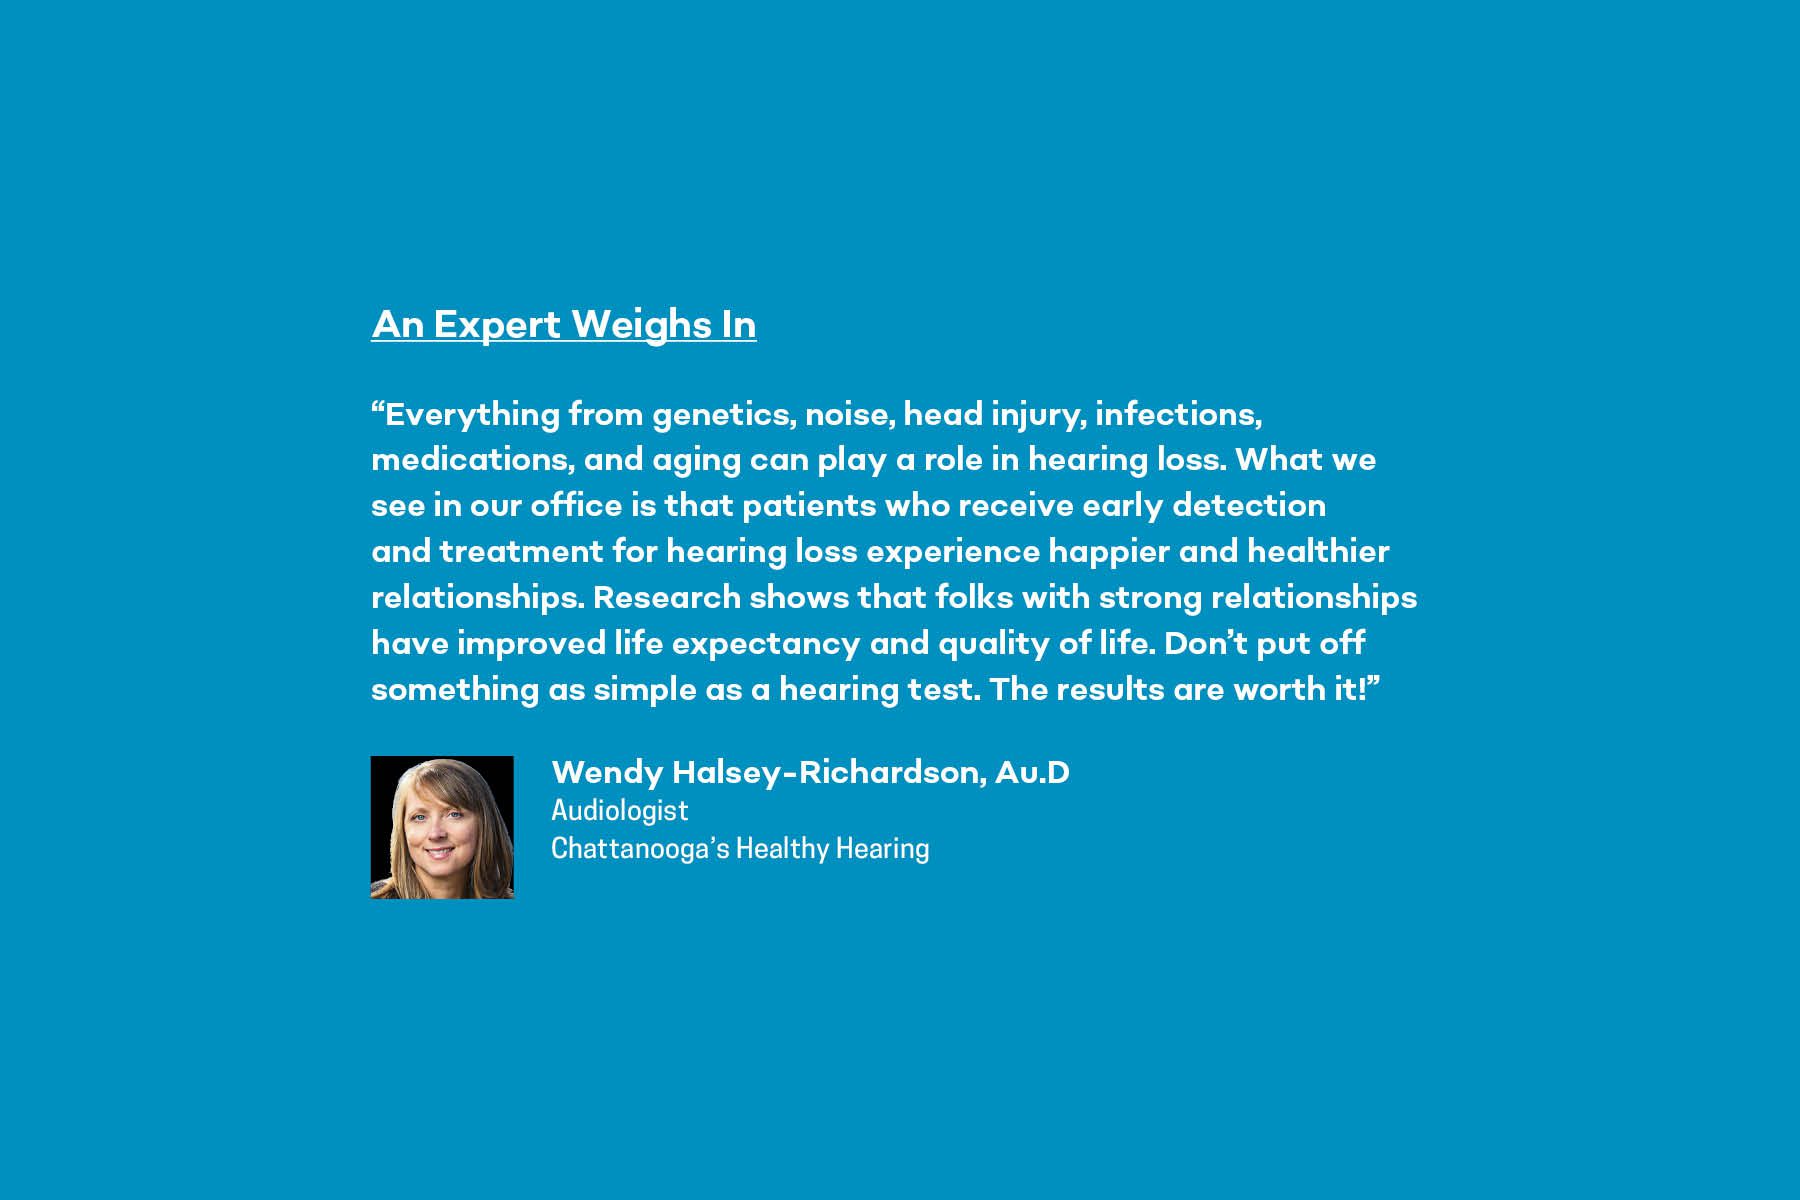 Expert opinion on hearing loss from Wendy Halsey-Richardson at Chattanooga's Healthy Hearing